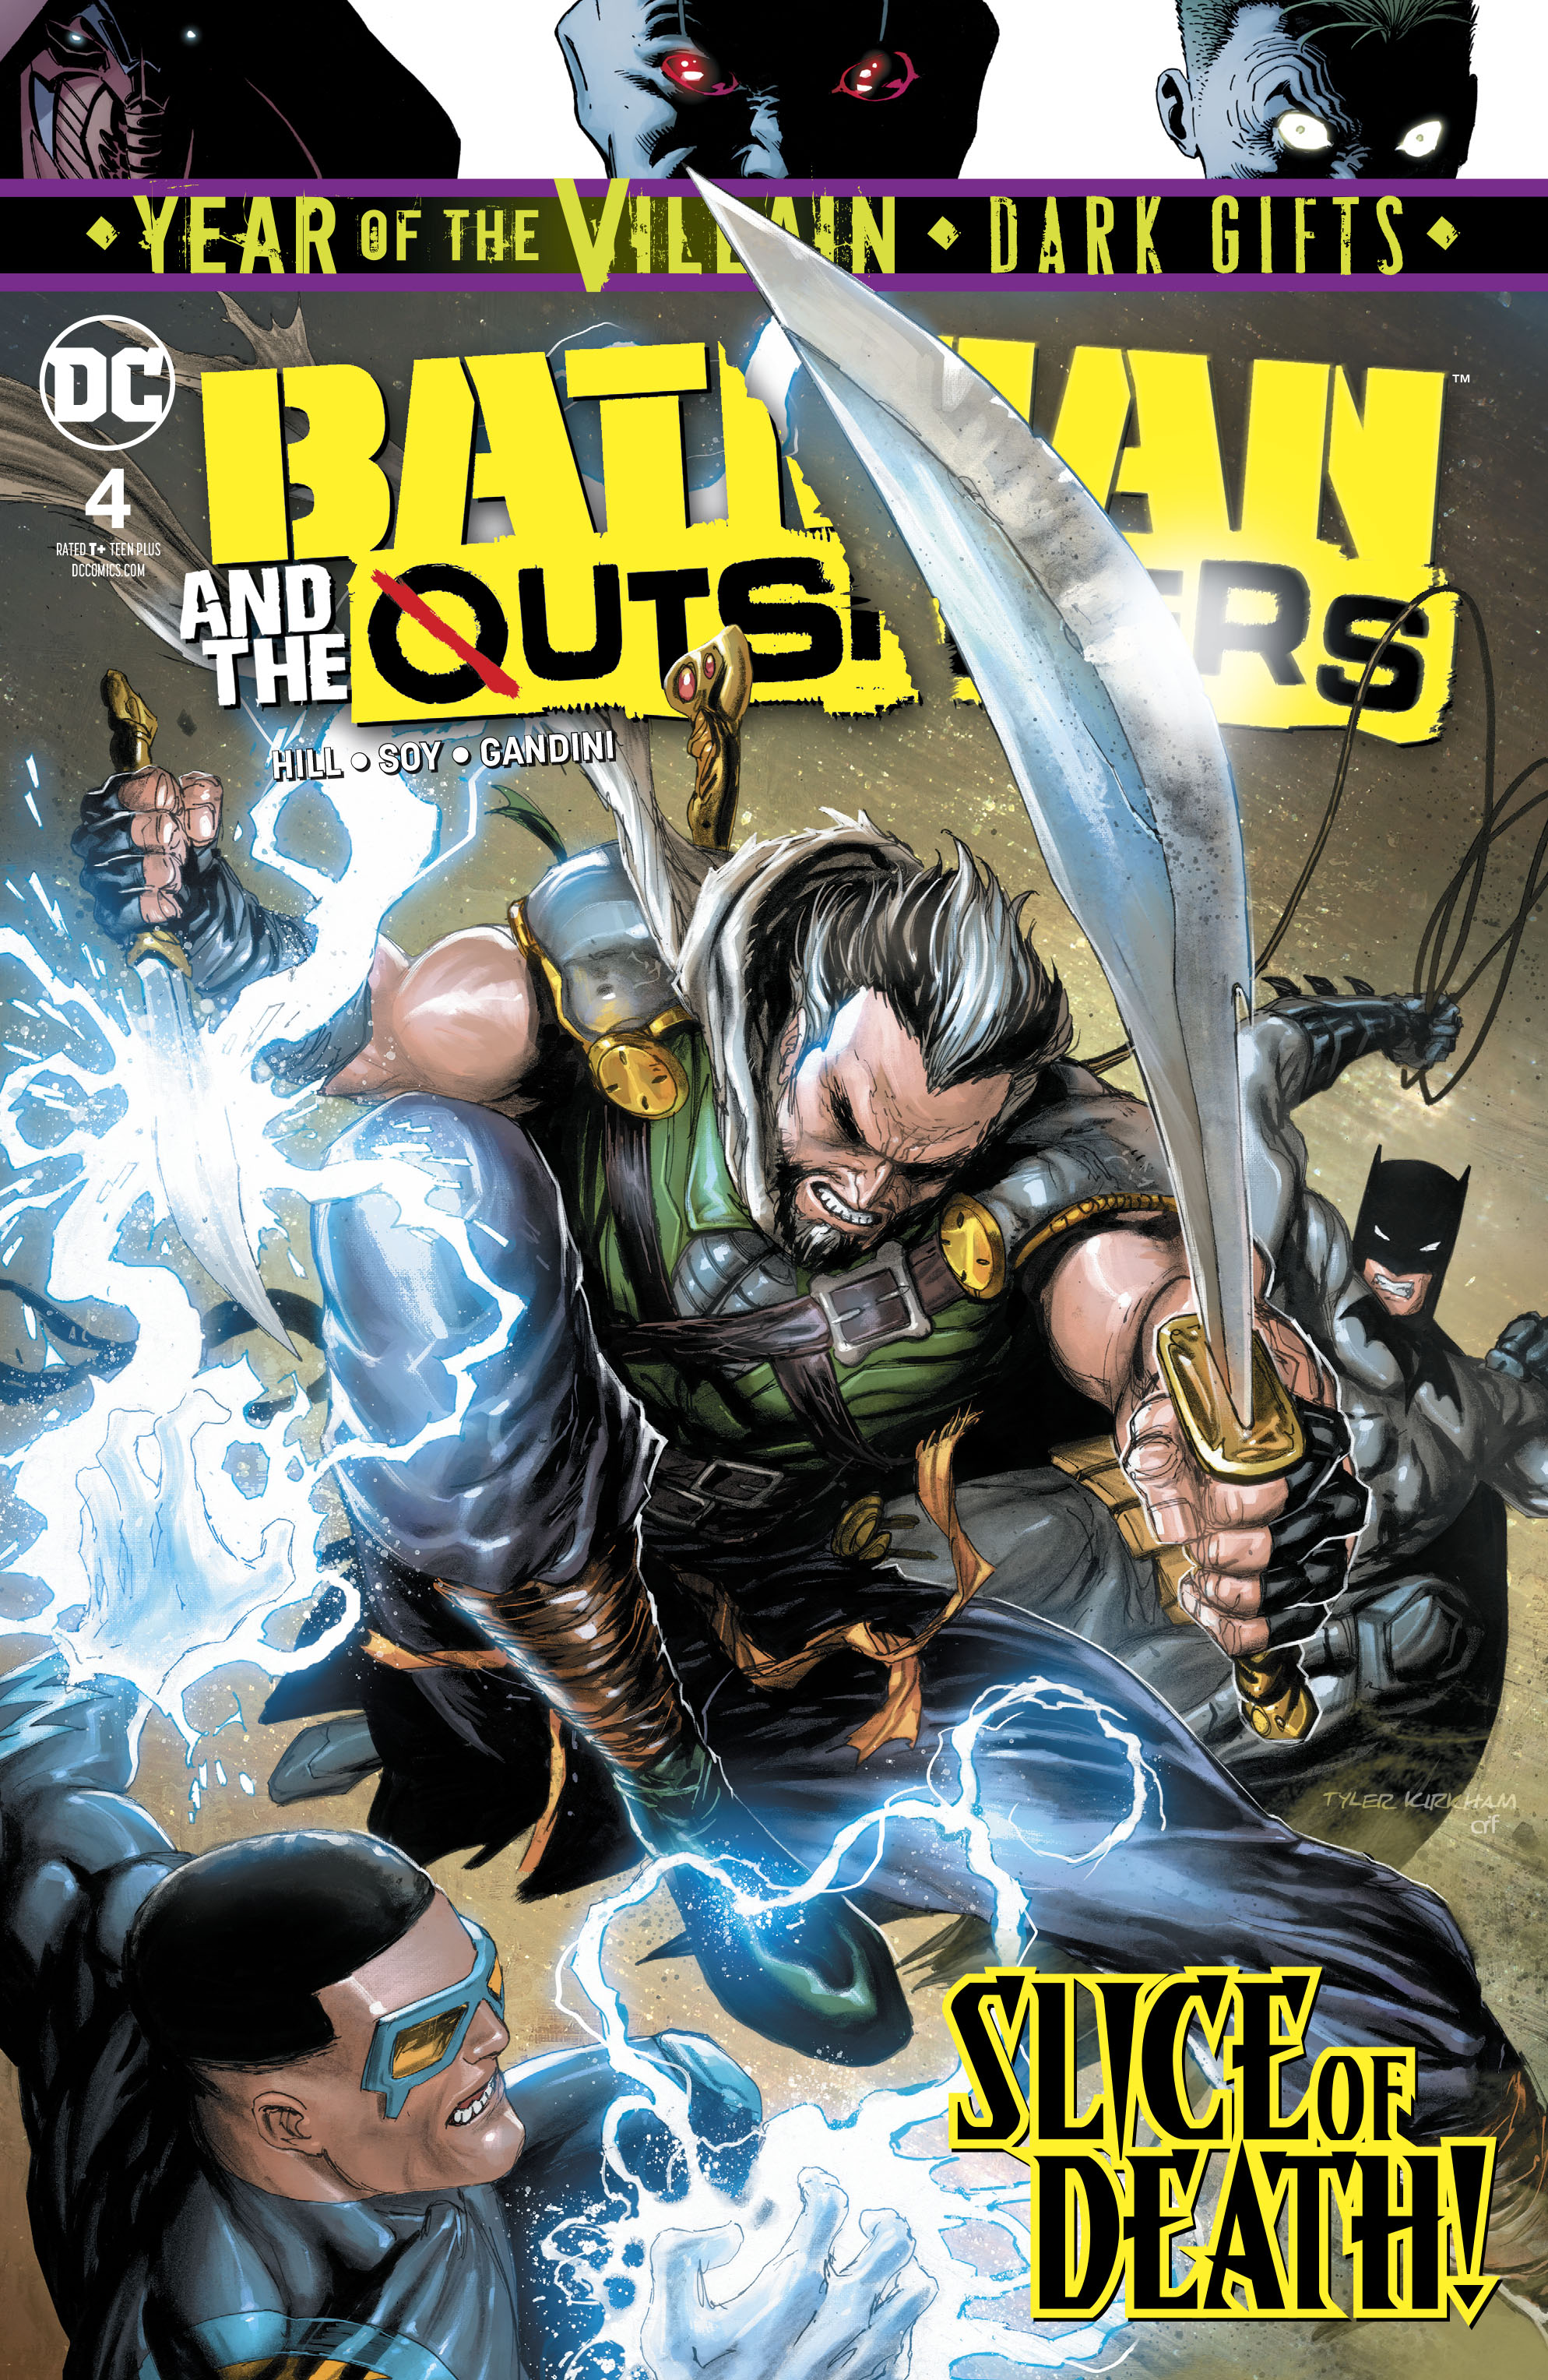 Batman and the Outsiders #4 Year of the Villain Dark Gifts